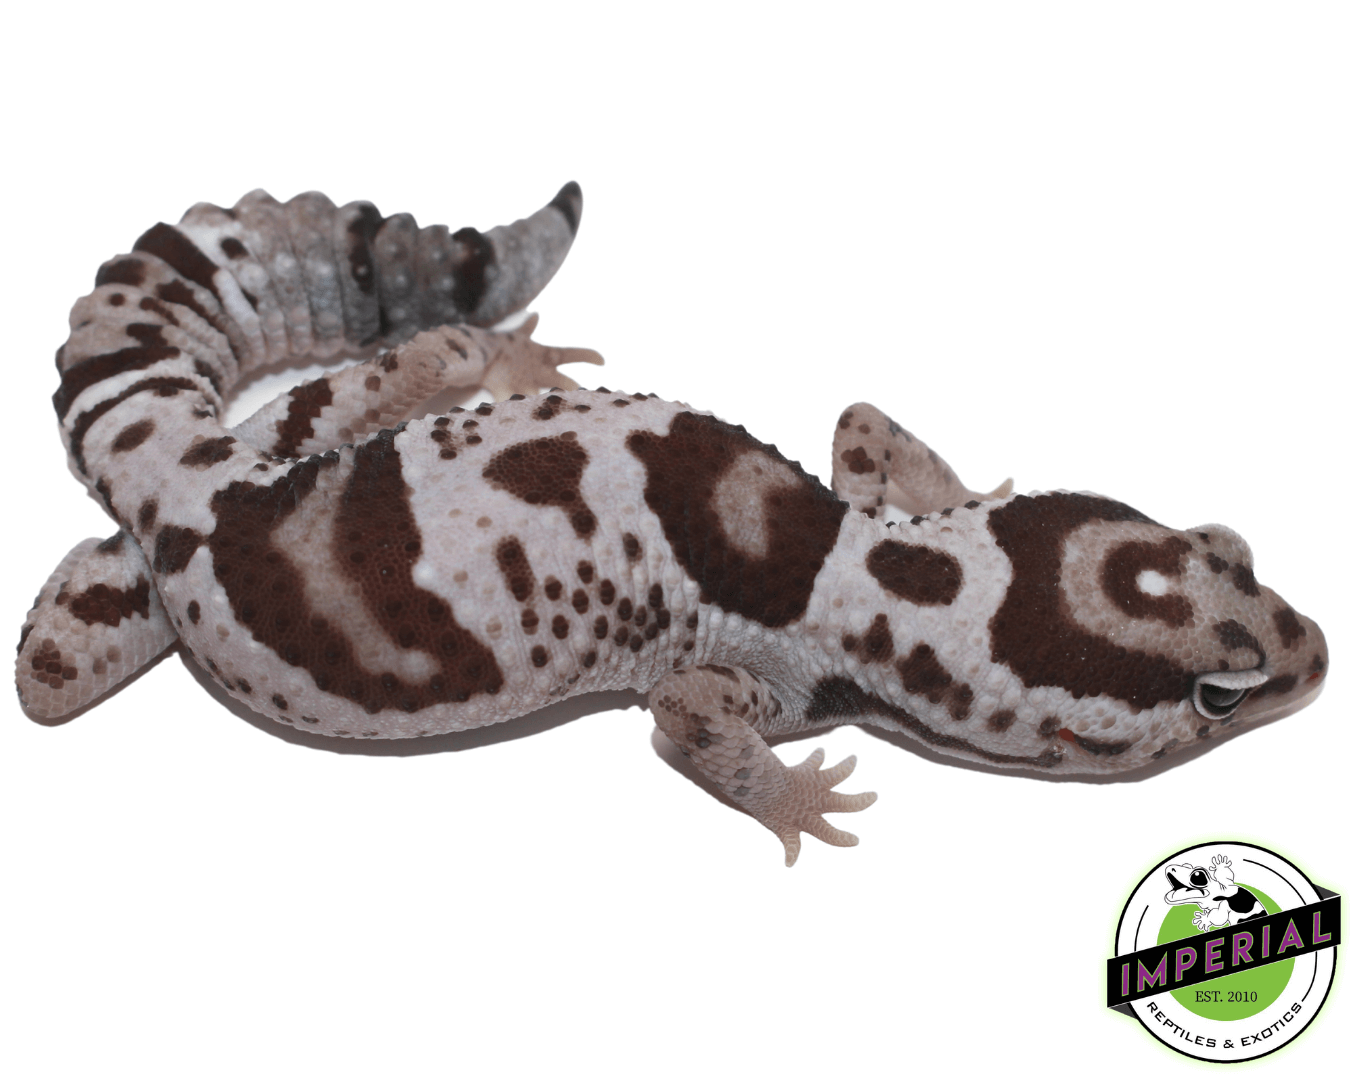 Whiteout Oreo Het Caramel African Fat Tail gecko for sale, buy reptiles online